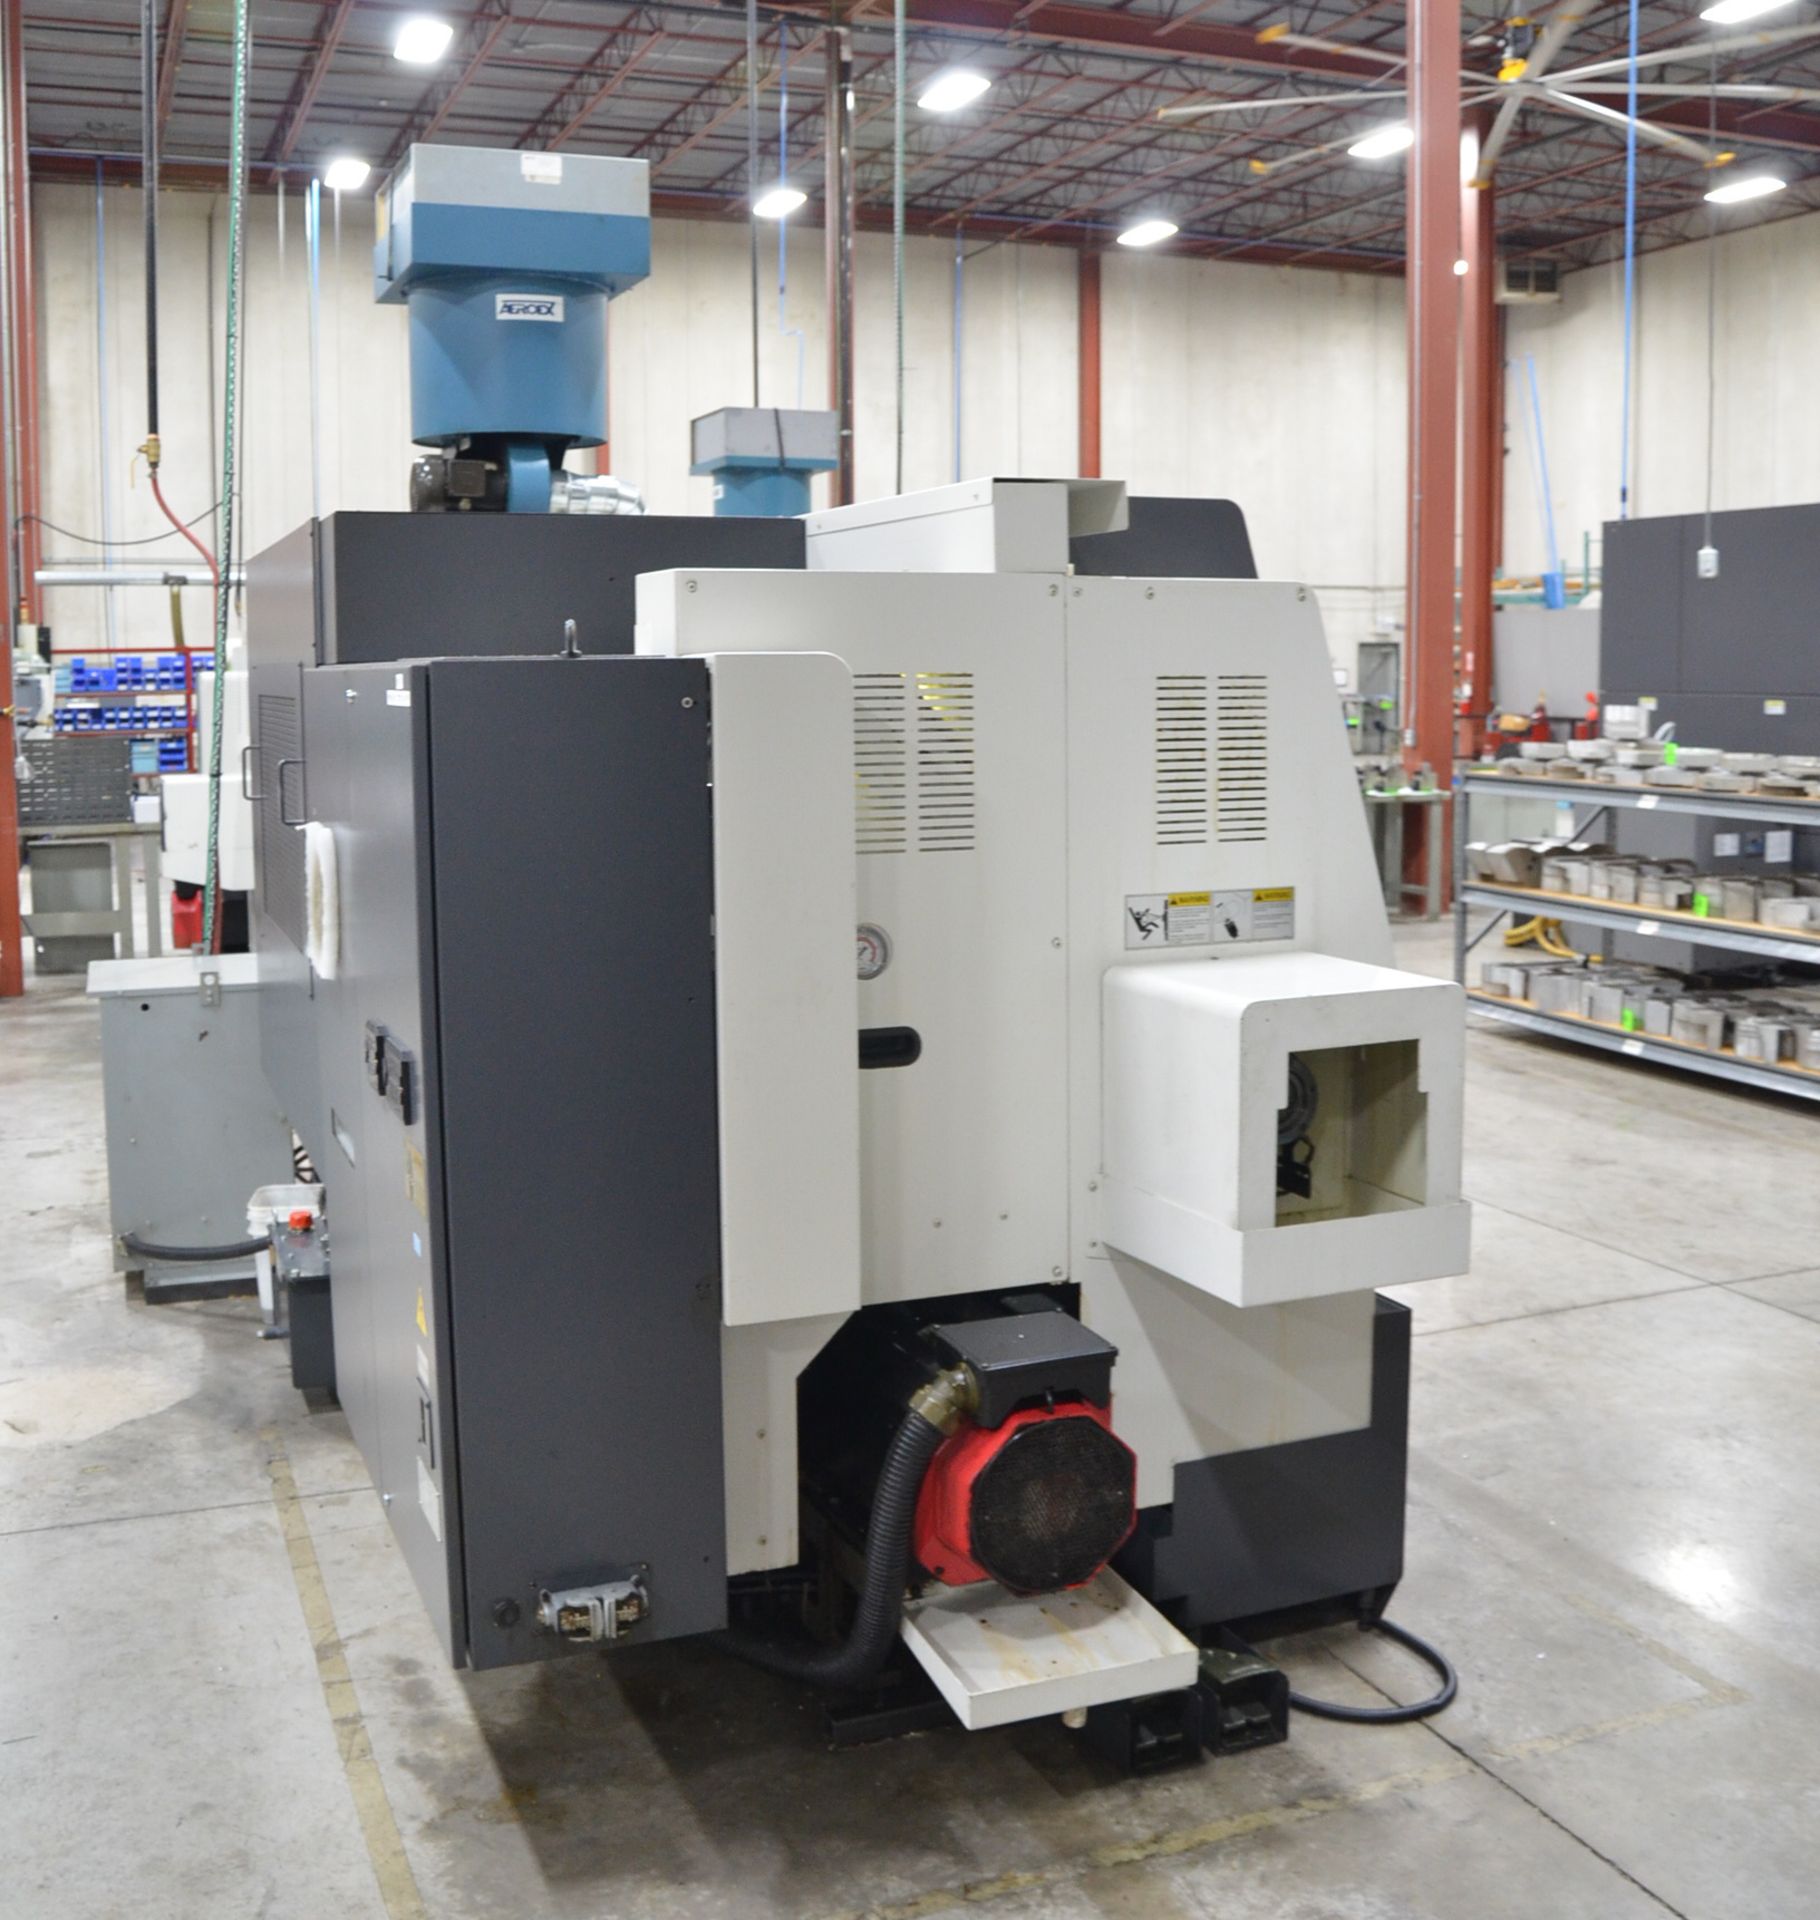 NAKAMURA-TOME SC300 CNC TURNING AND LIVE MILLING CENTER WITH FANUC 21I-TB CNC CONTROL, 22.04" SWING, - Image 6 of 16